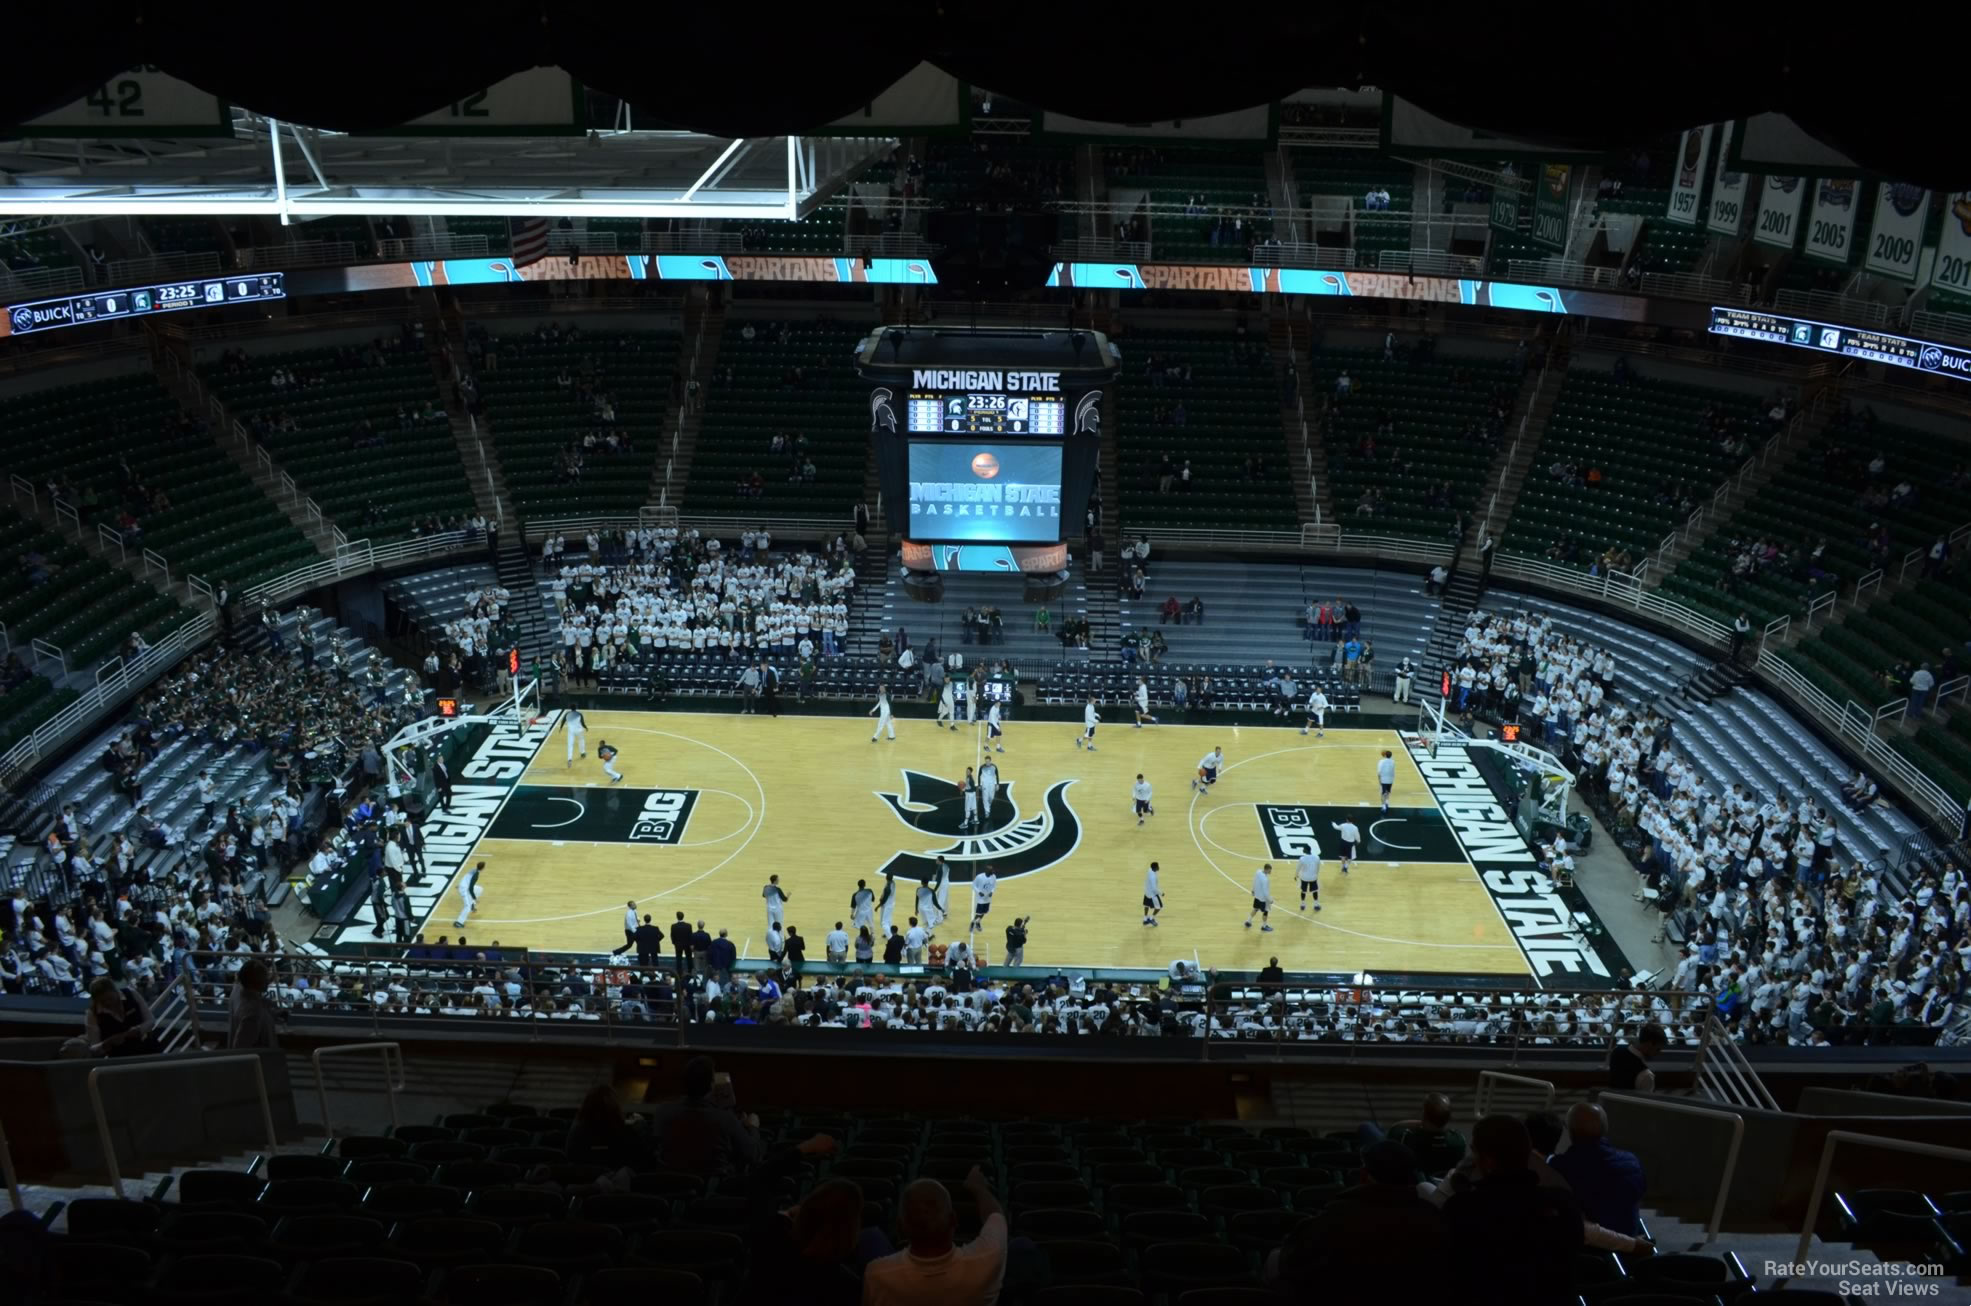 section 209, row 15 seat view  - breslin center